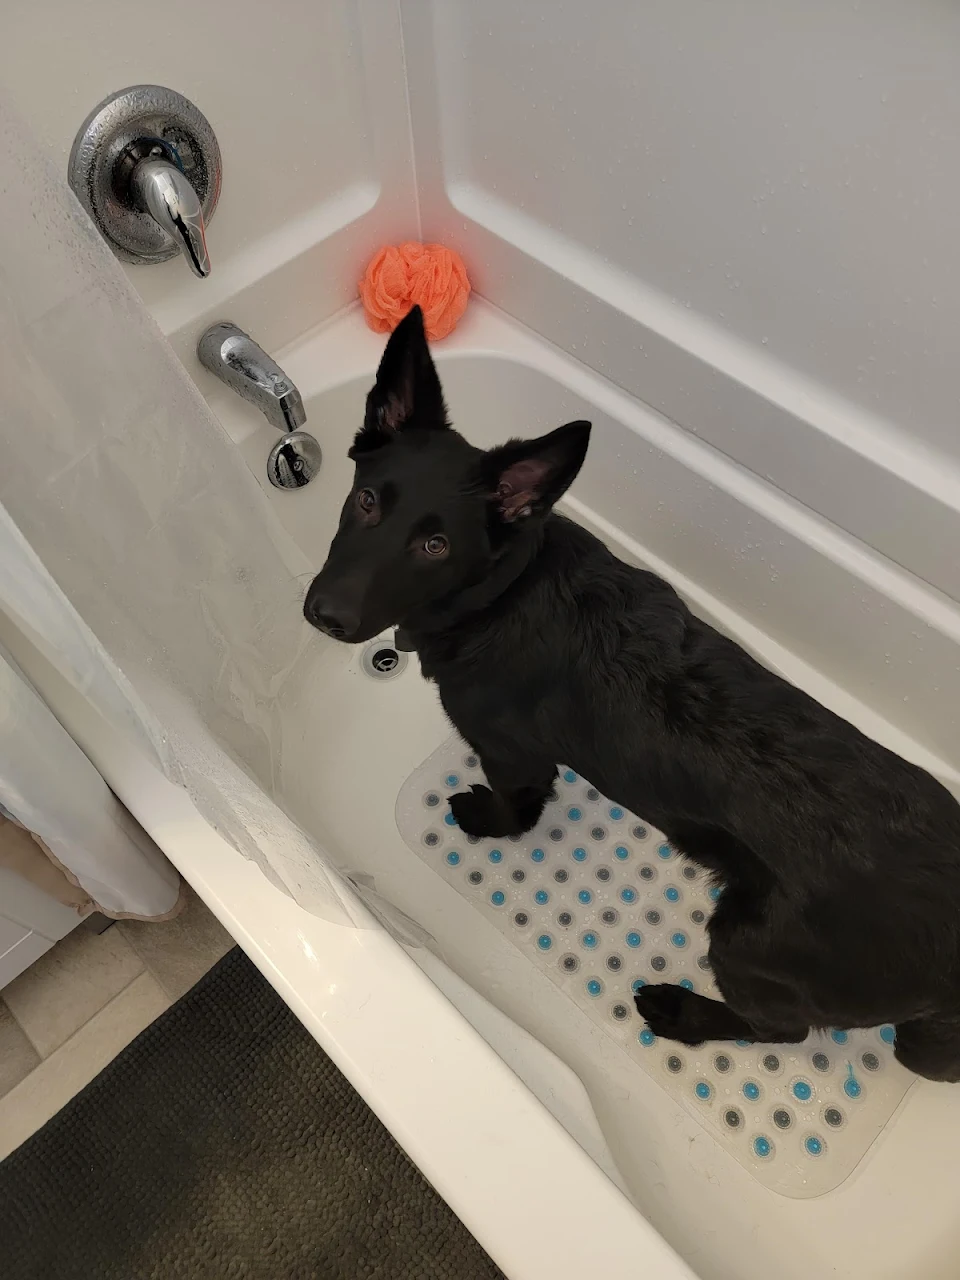 Caught her in the bath